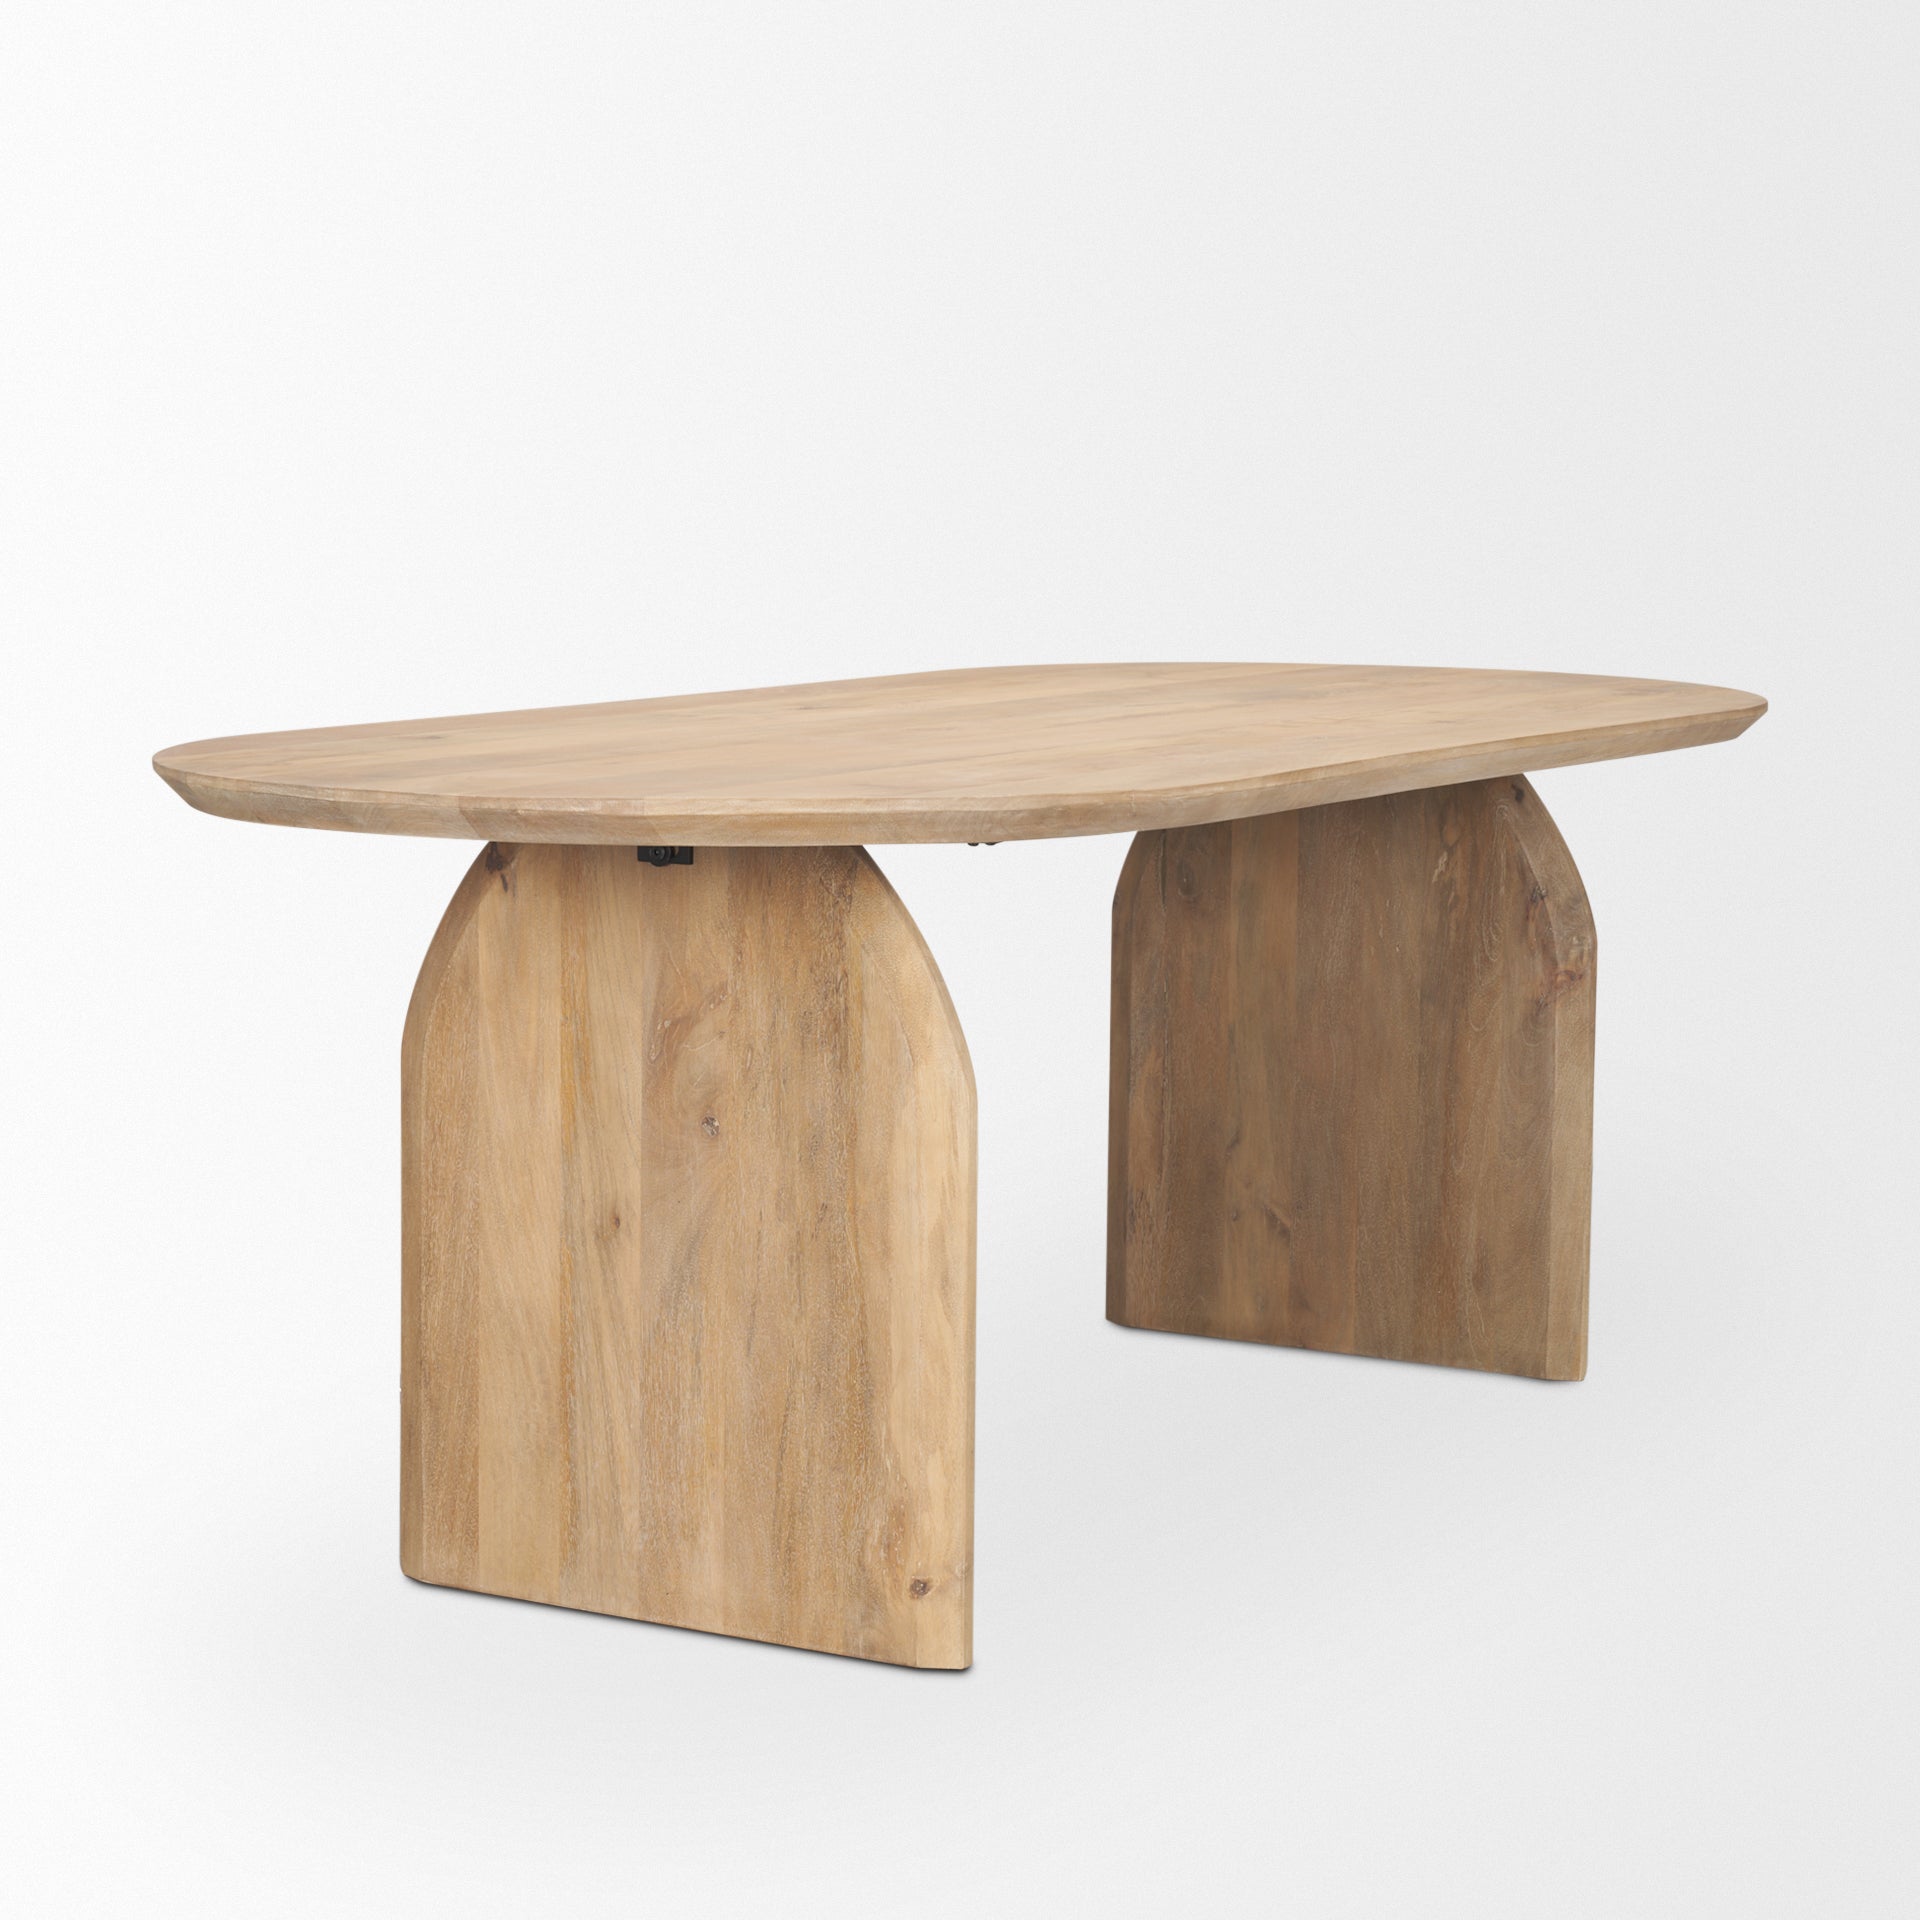 Marcella Dining Table